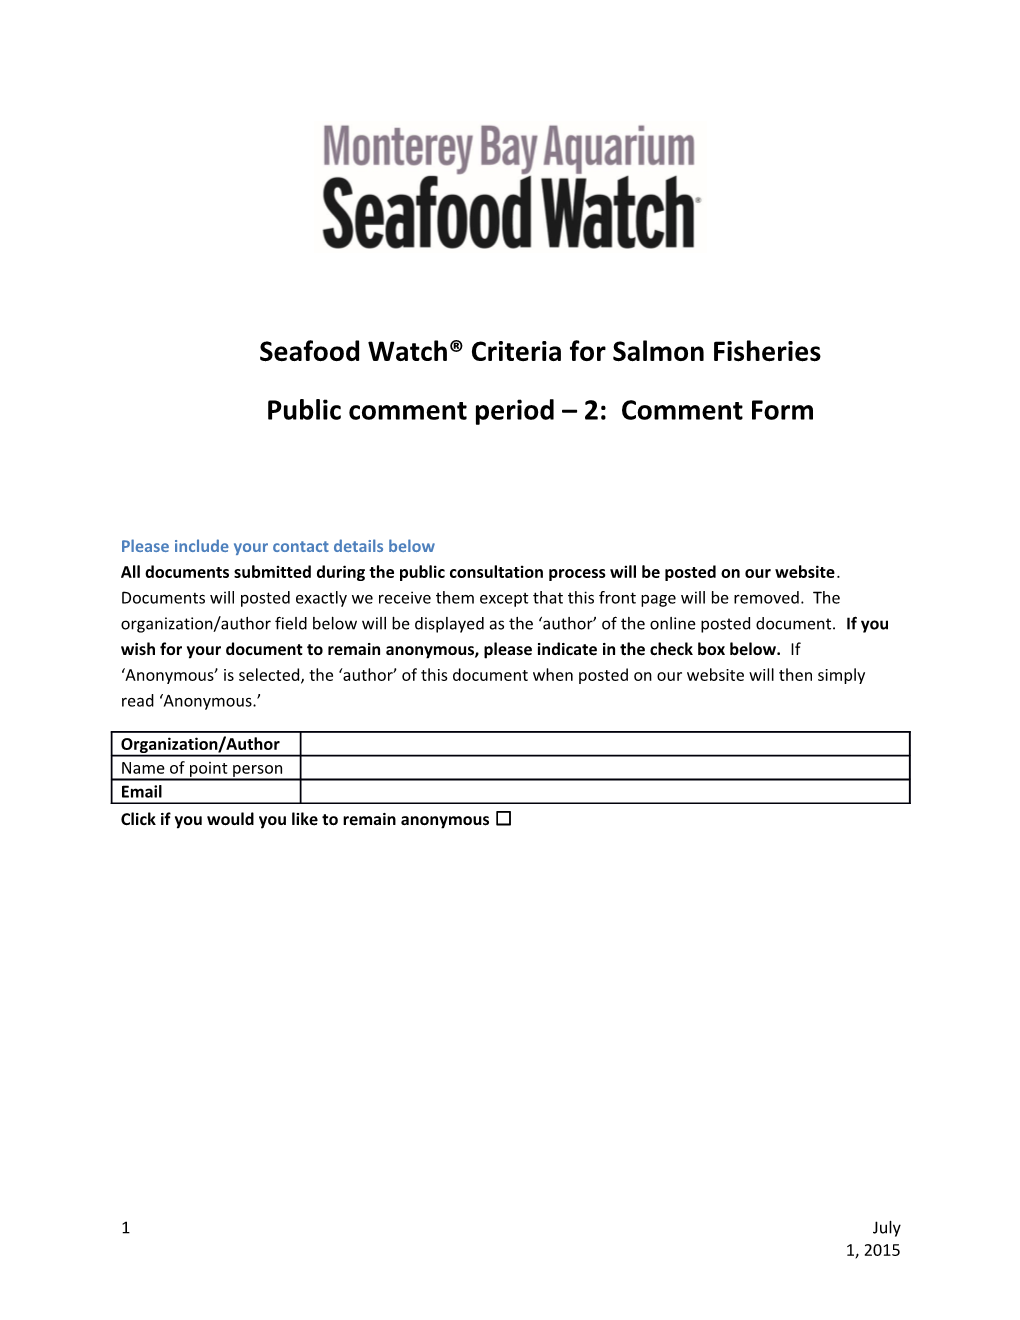 Seafood Watch Criteria for Salmon Fisheries